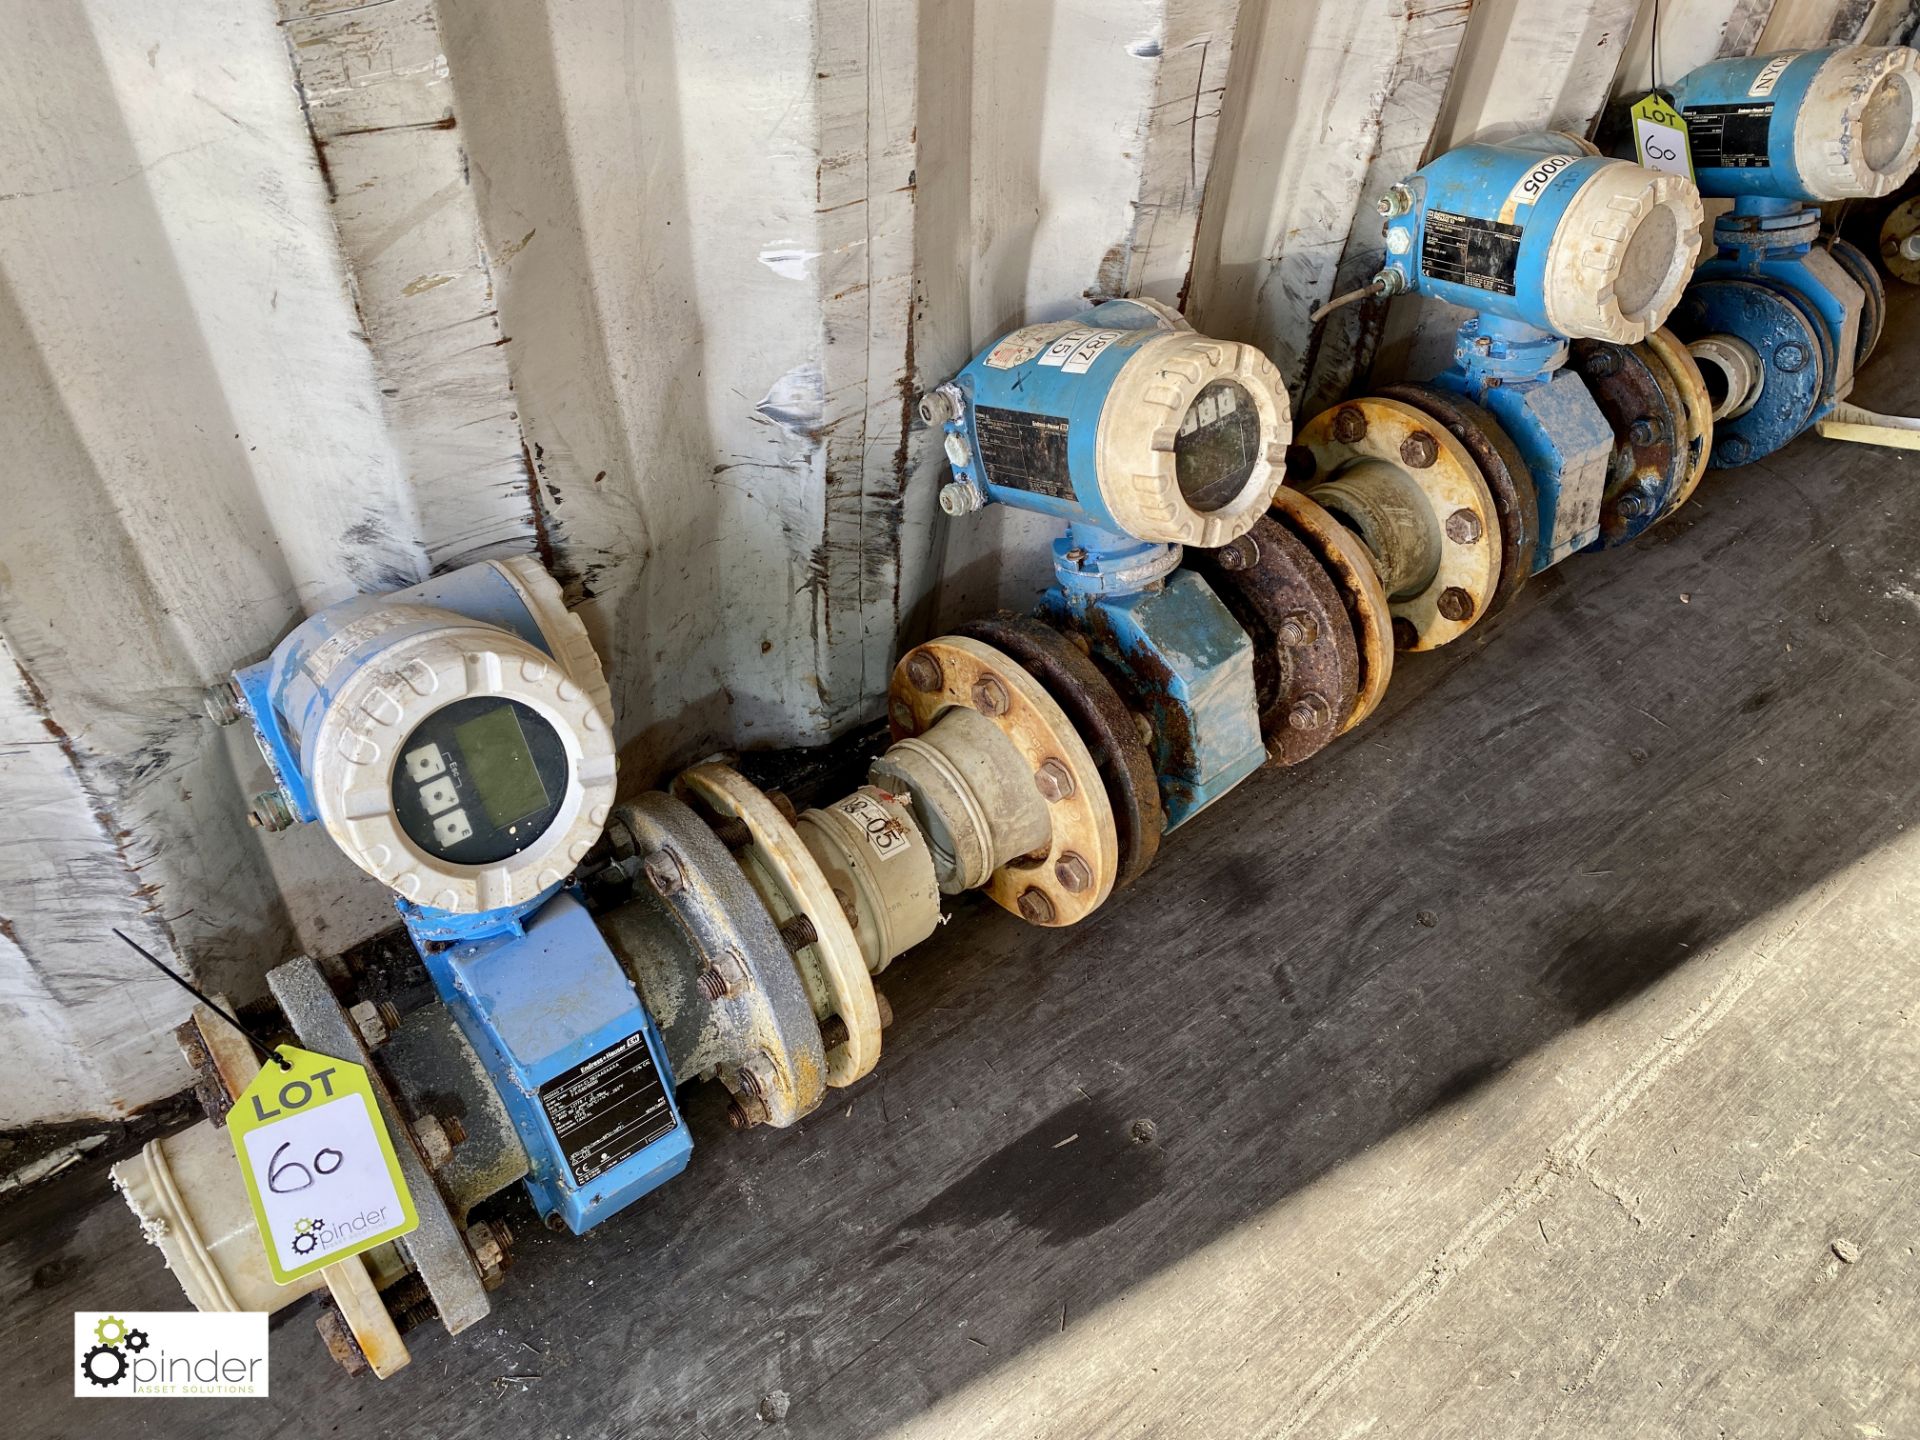 4 Endress & Hauser Flow Meters, with valves (container 3) (please note there is a lift out fee of £5